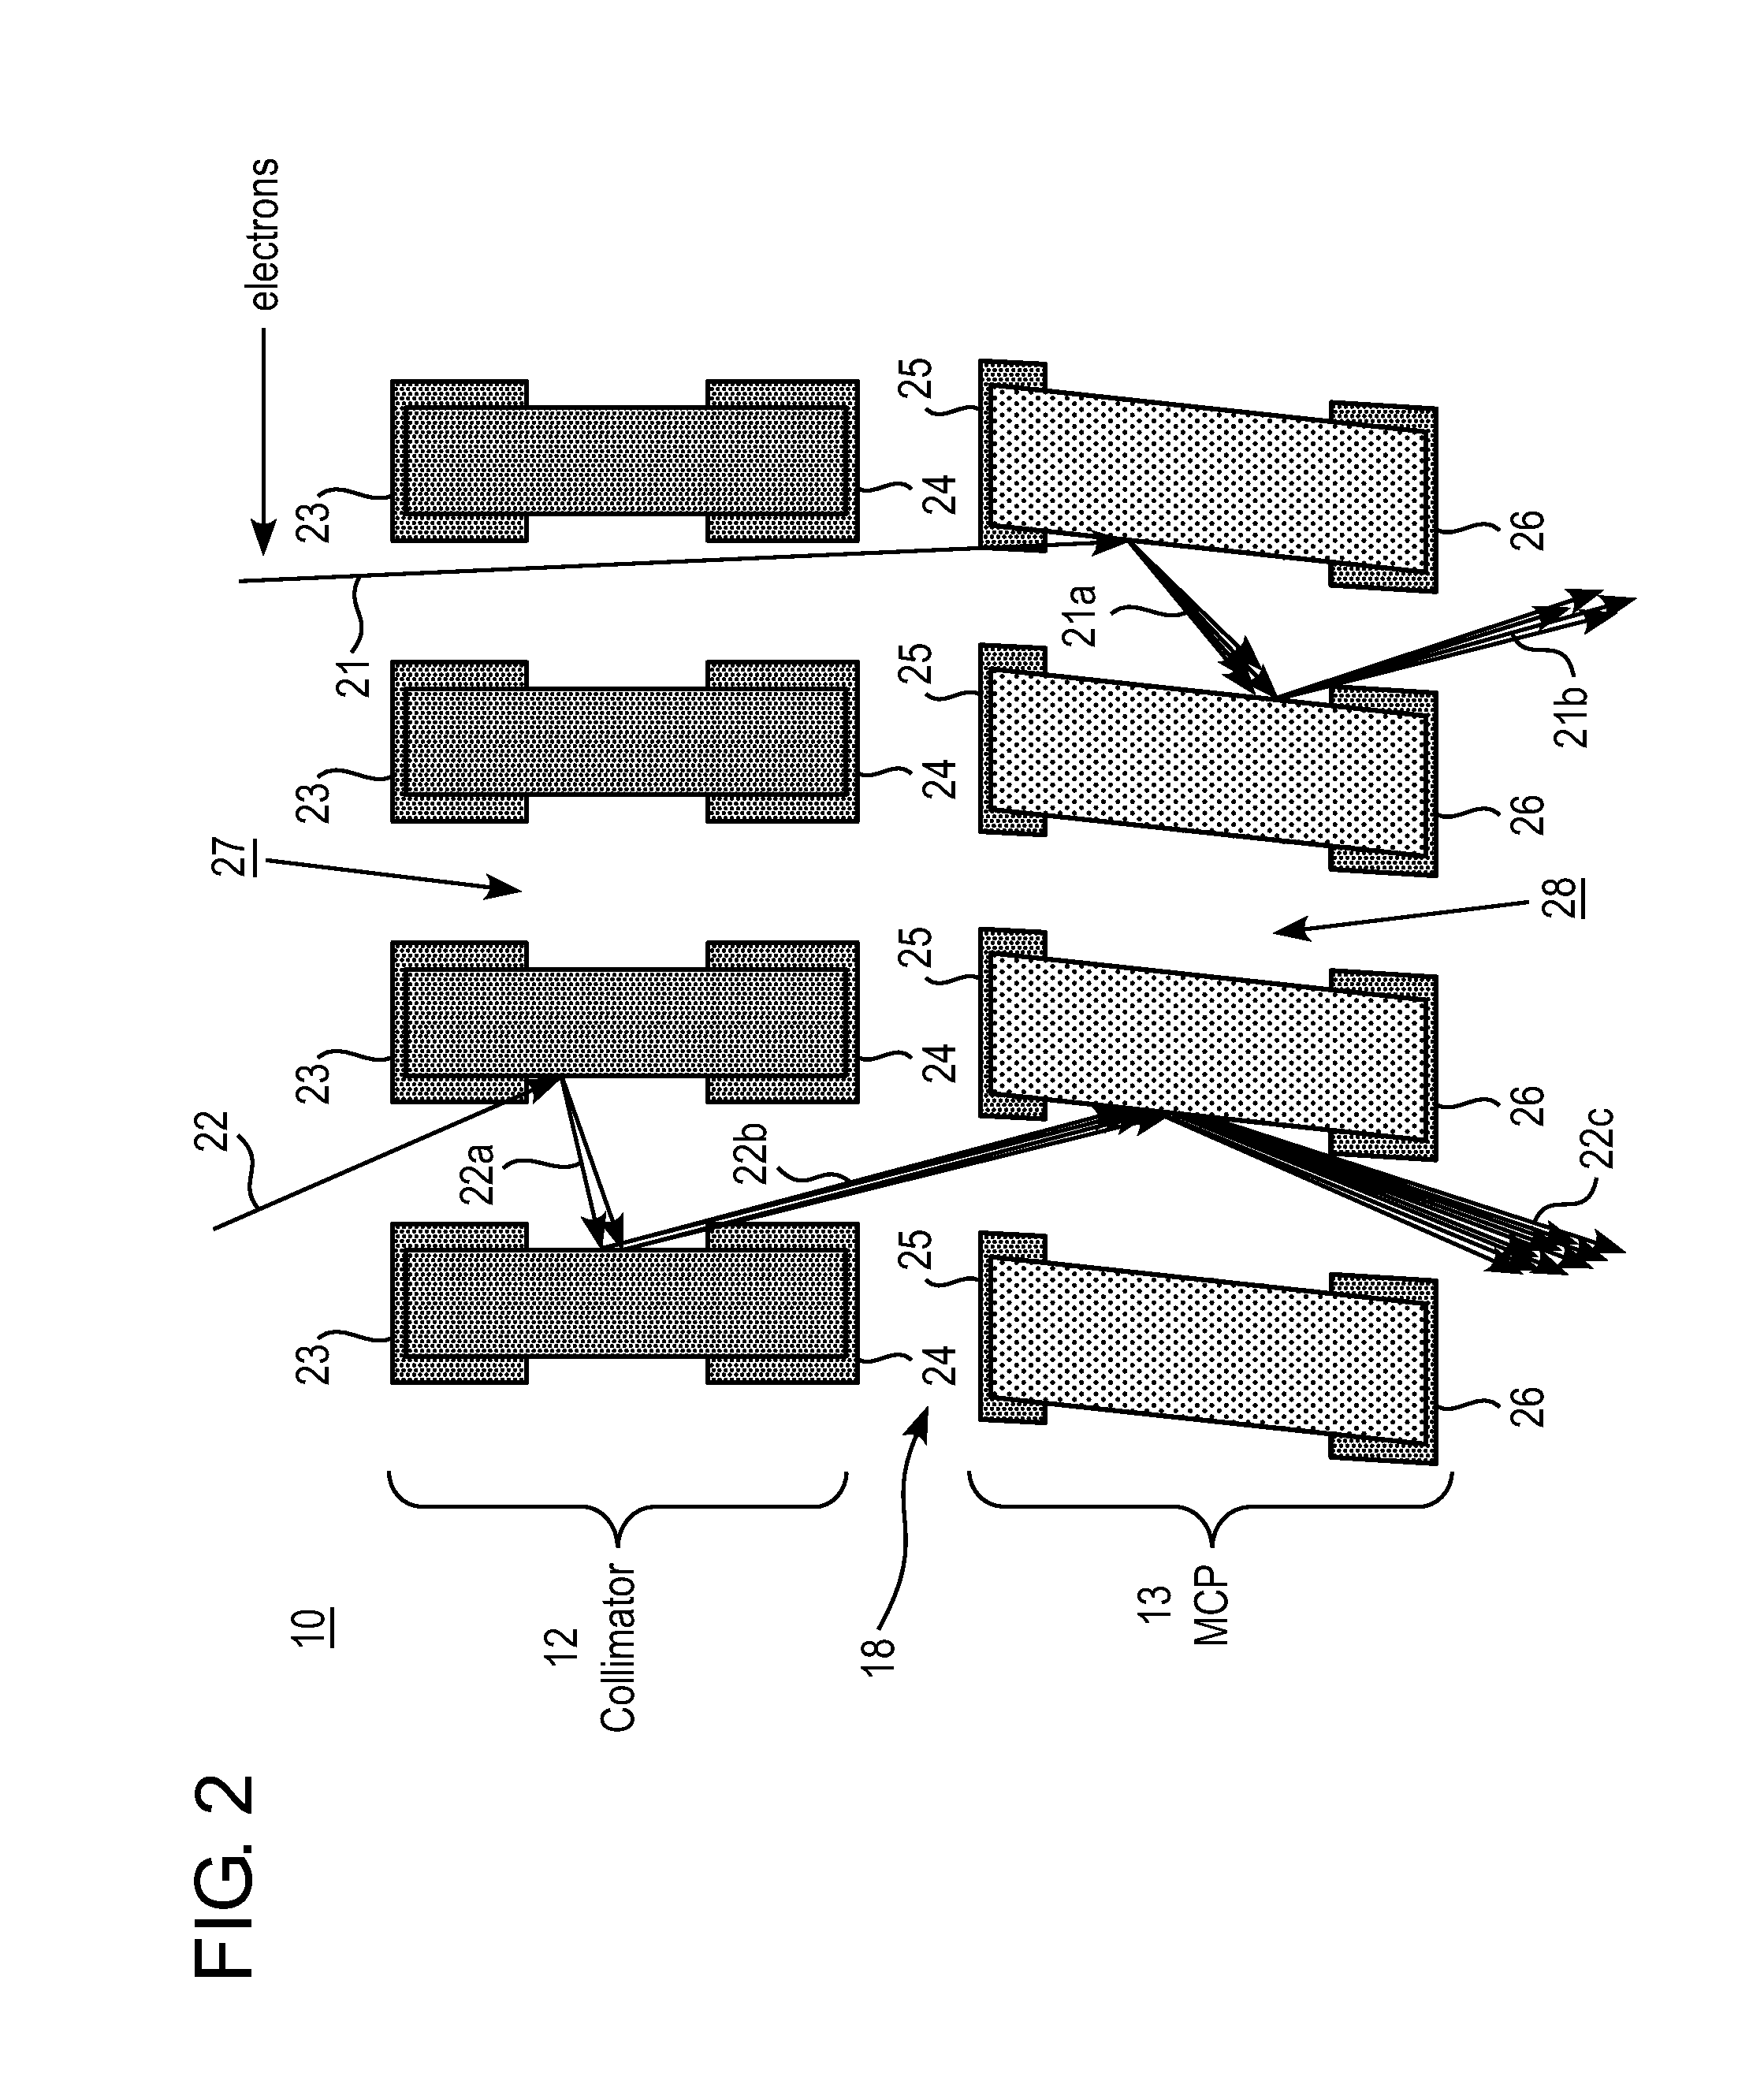 Image intensifier having an ion barrier with conductive material and method for making the same